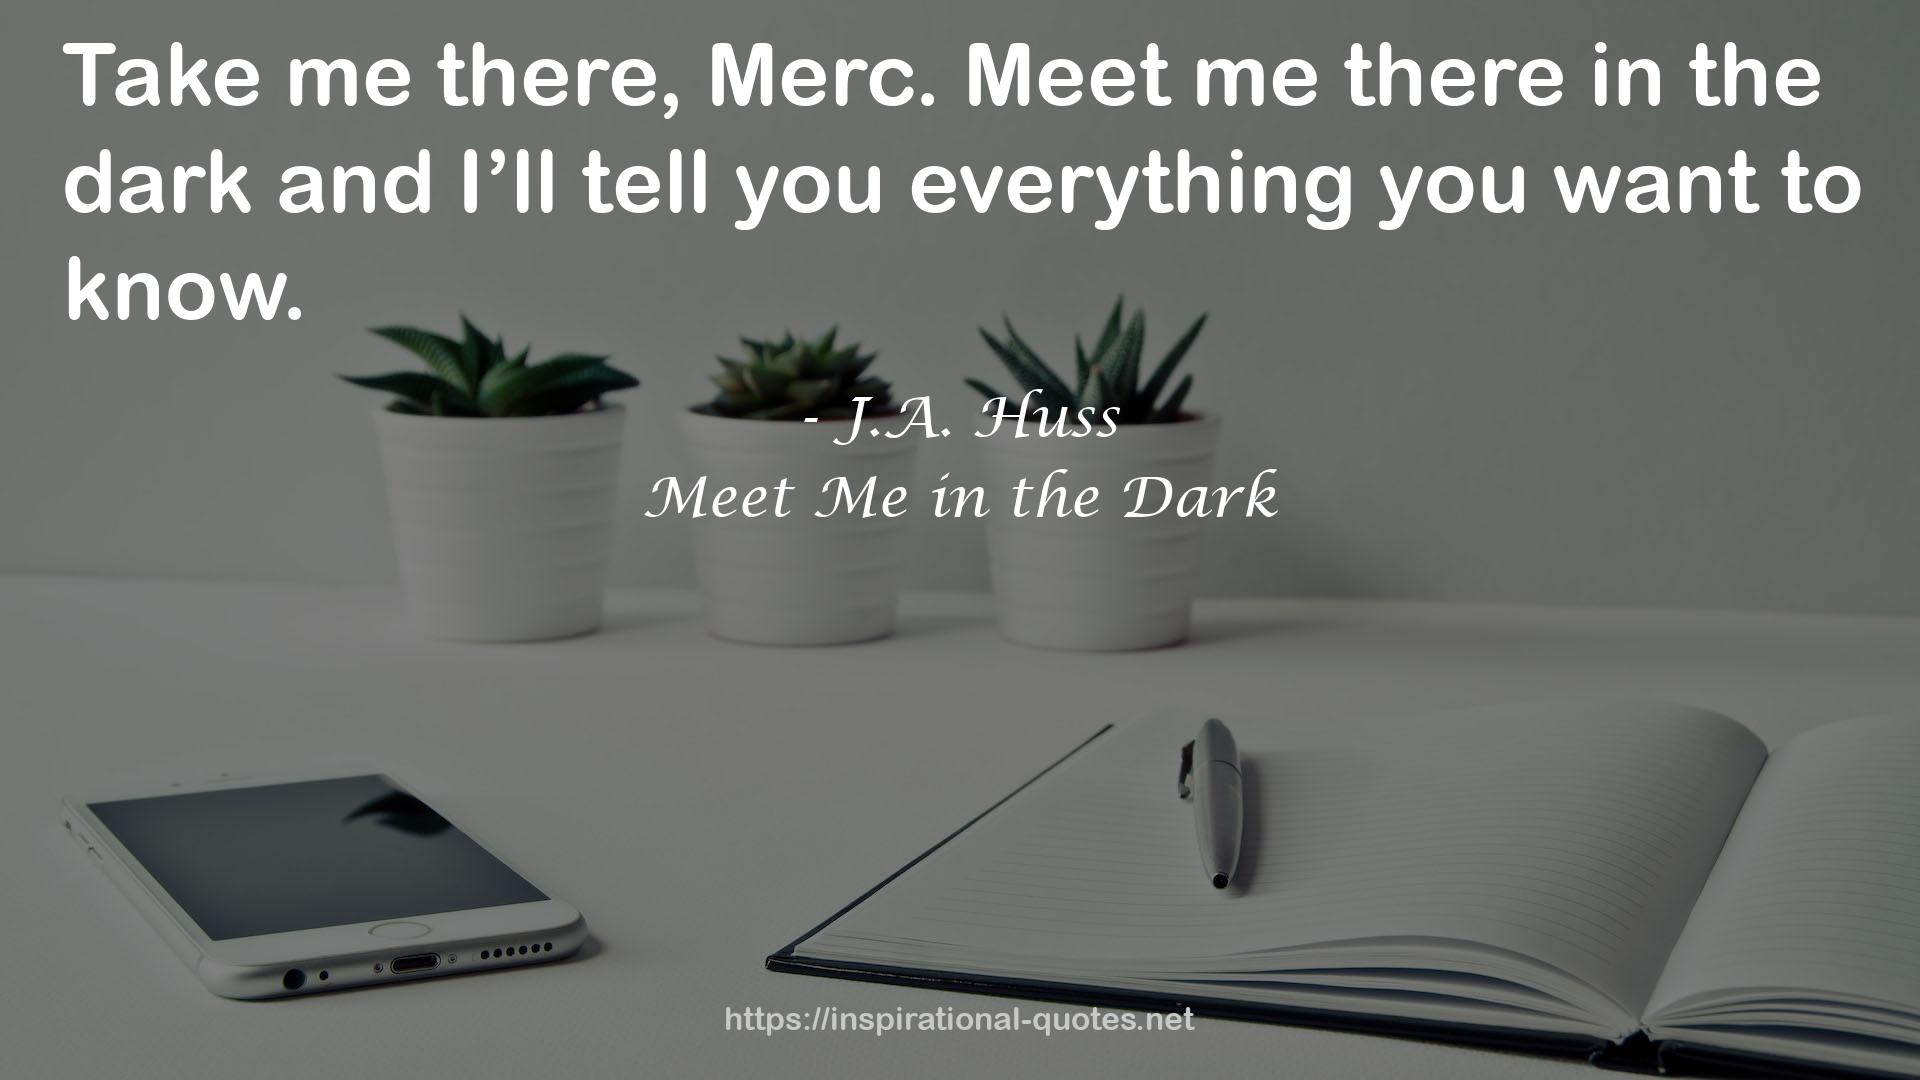 Meet Me in the Dark QUOTES